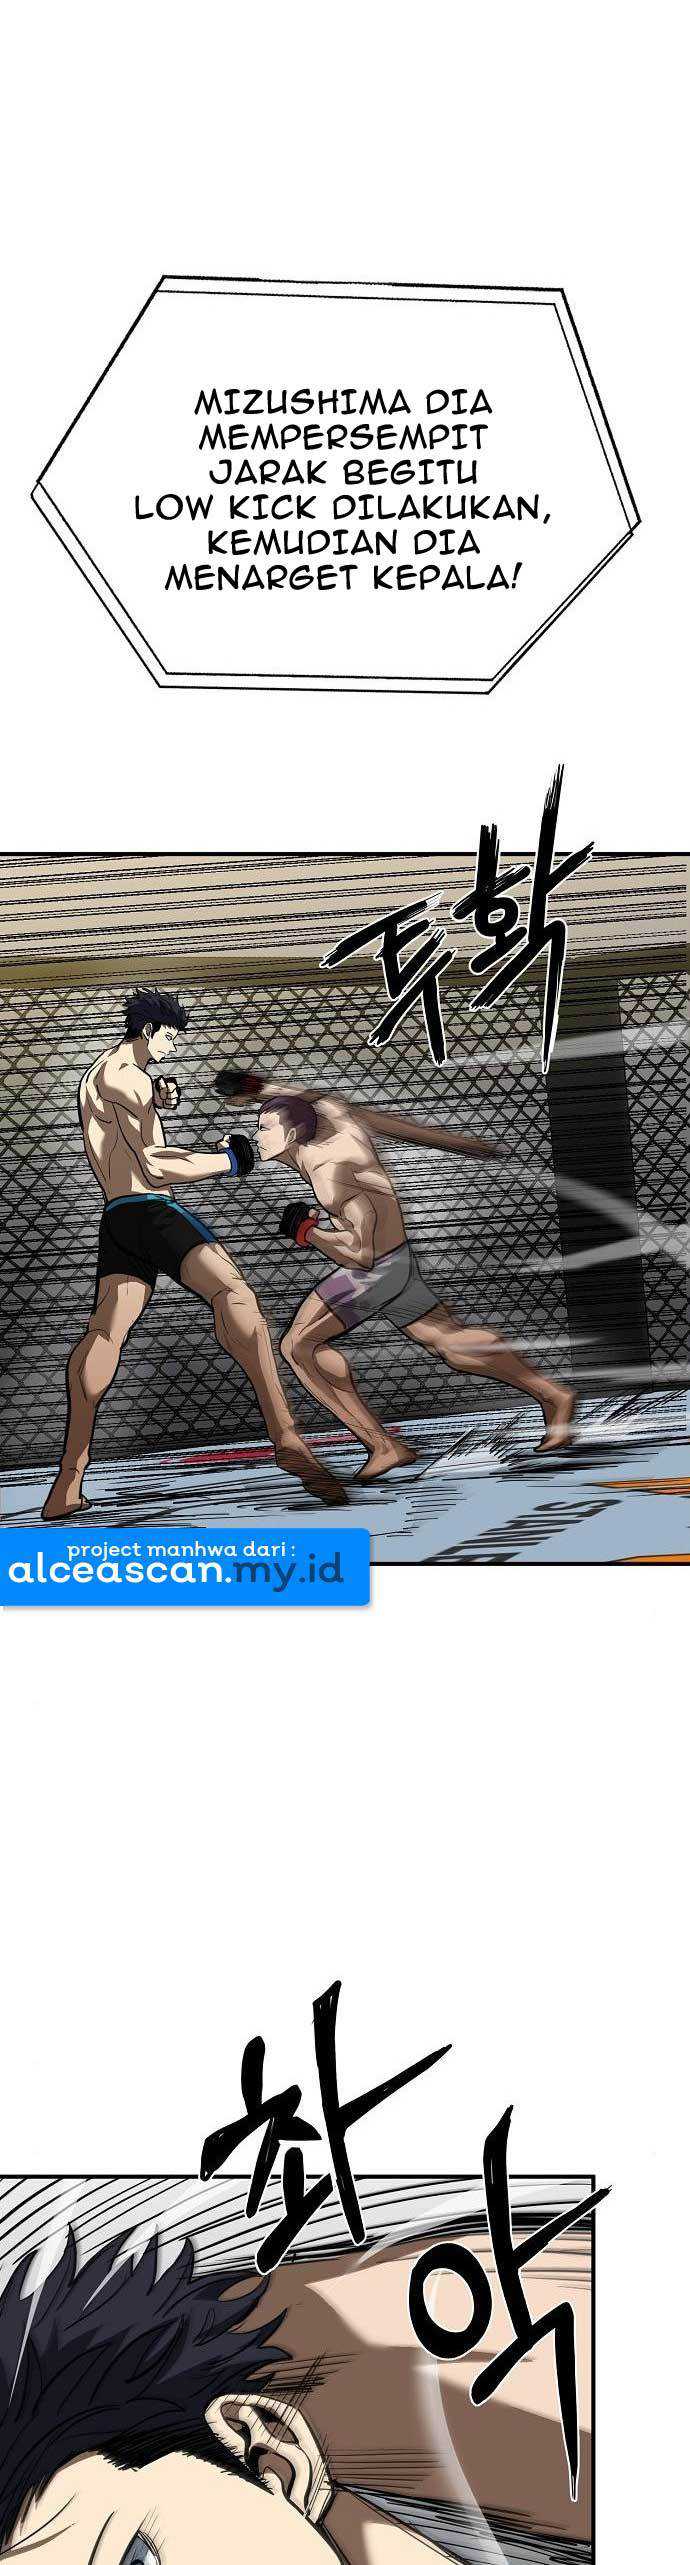 King MMA Chapter 32